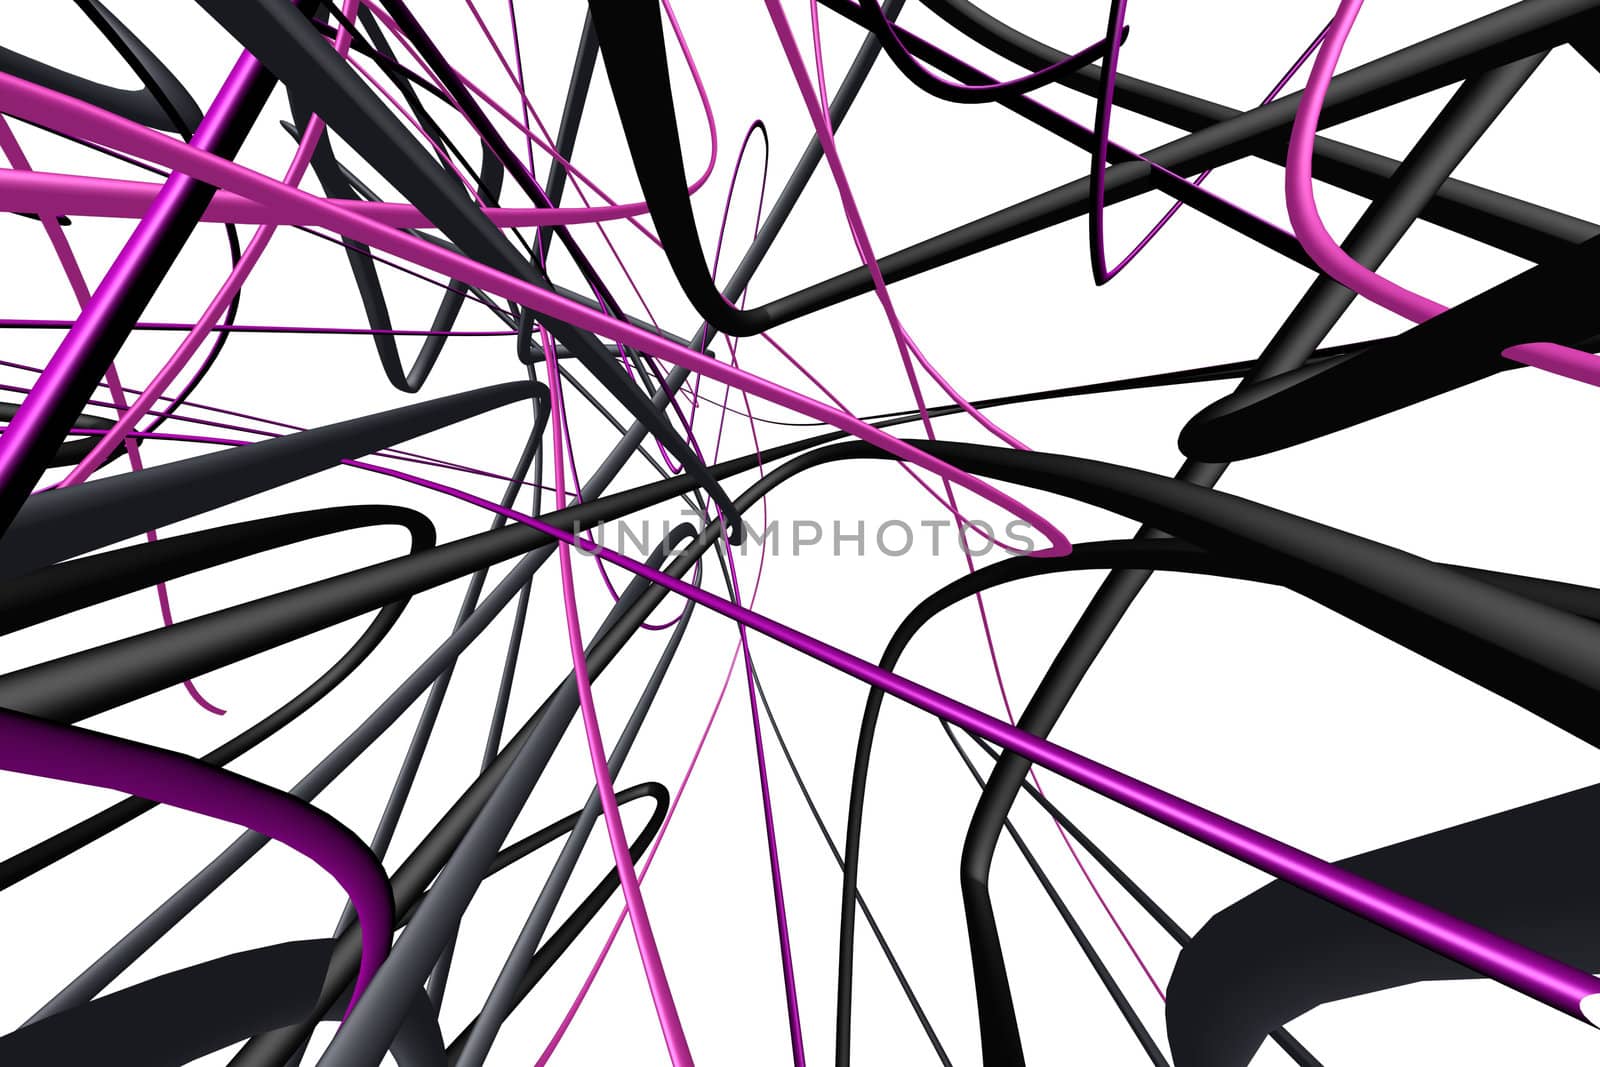 3D abstract lines on a white background. Great for backgrounds or design elements.